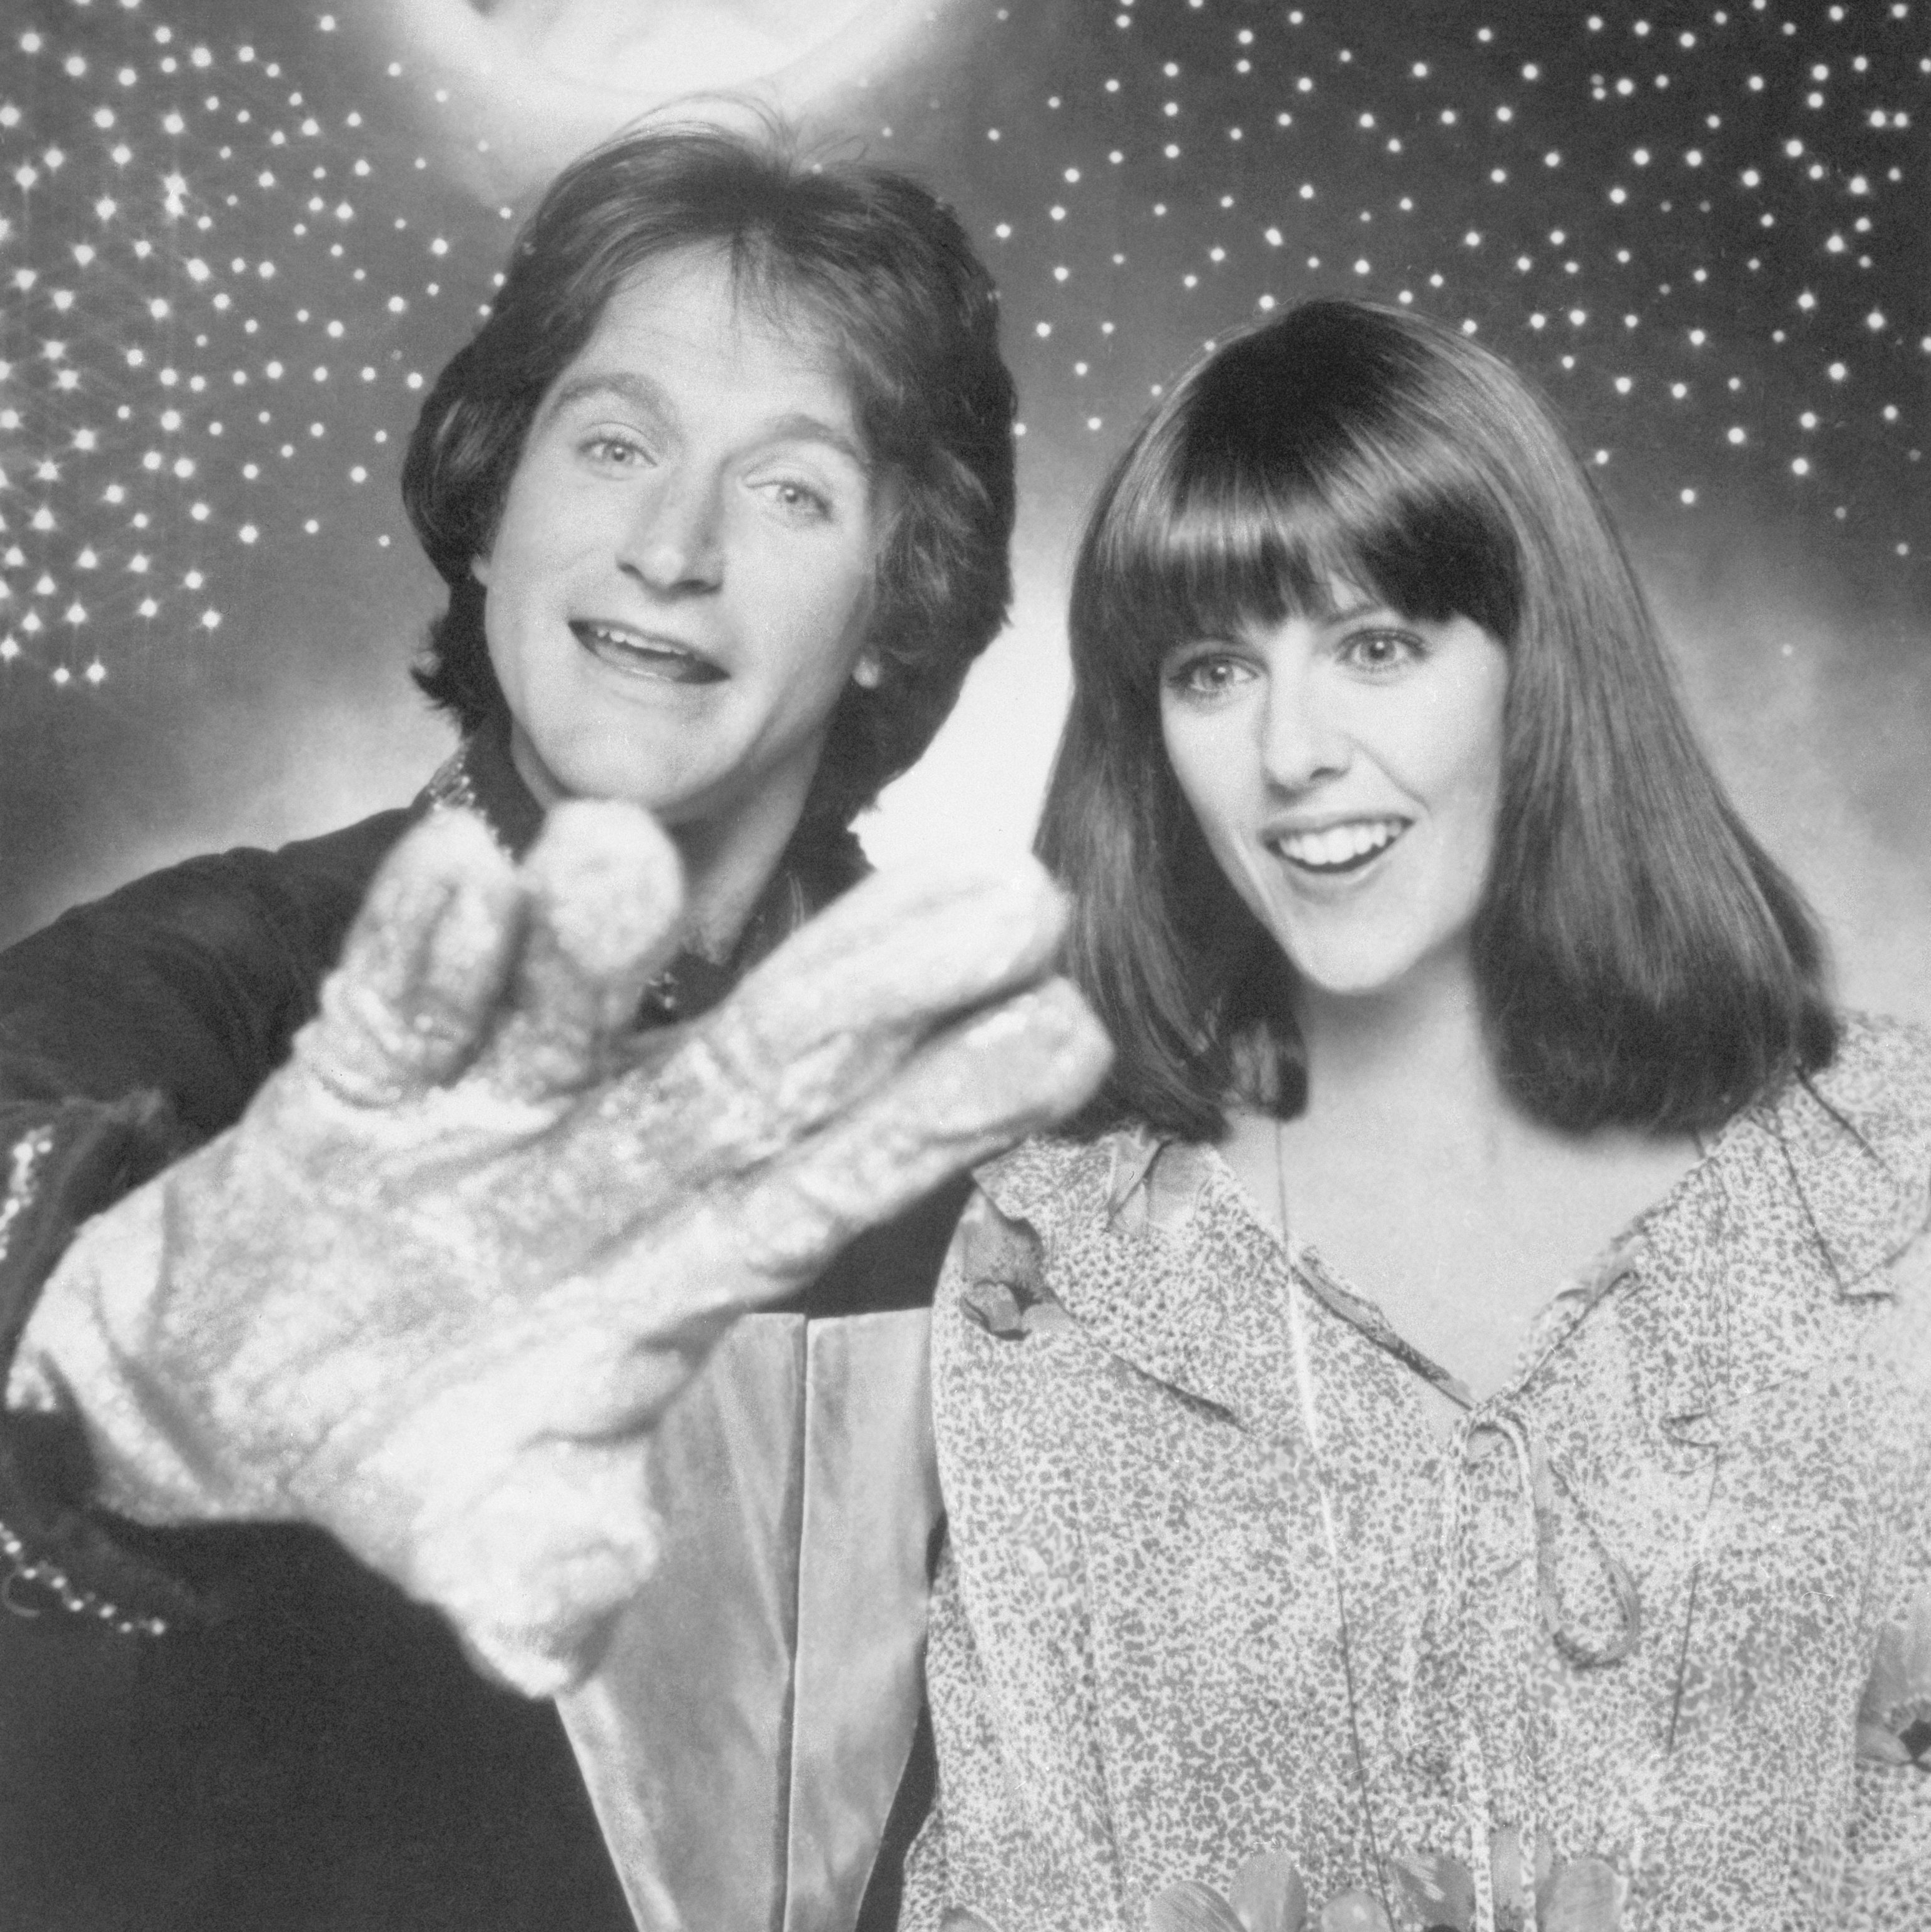 Robin Williams and Pam Dawber in Mork and Mindy, 1979